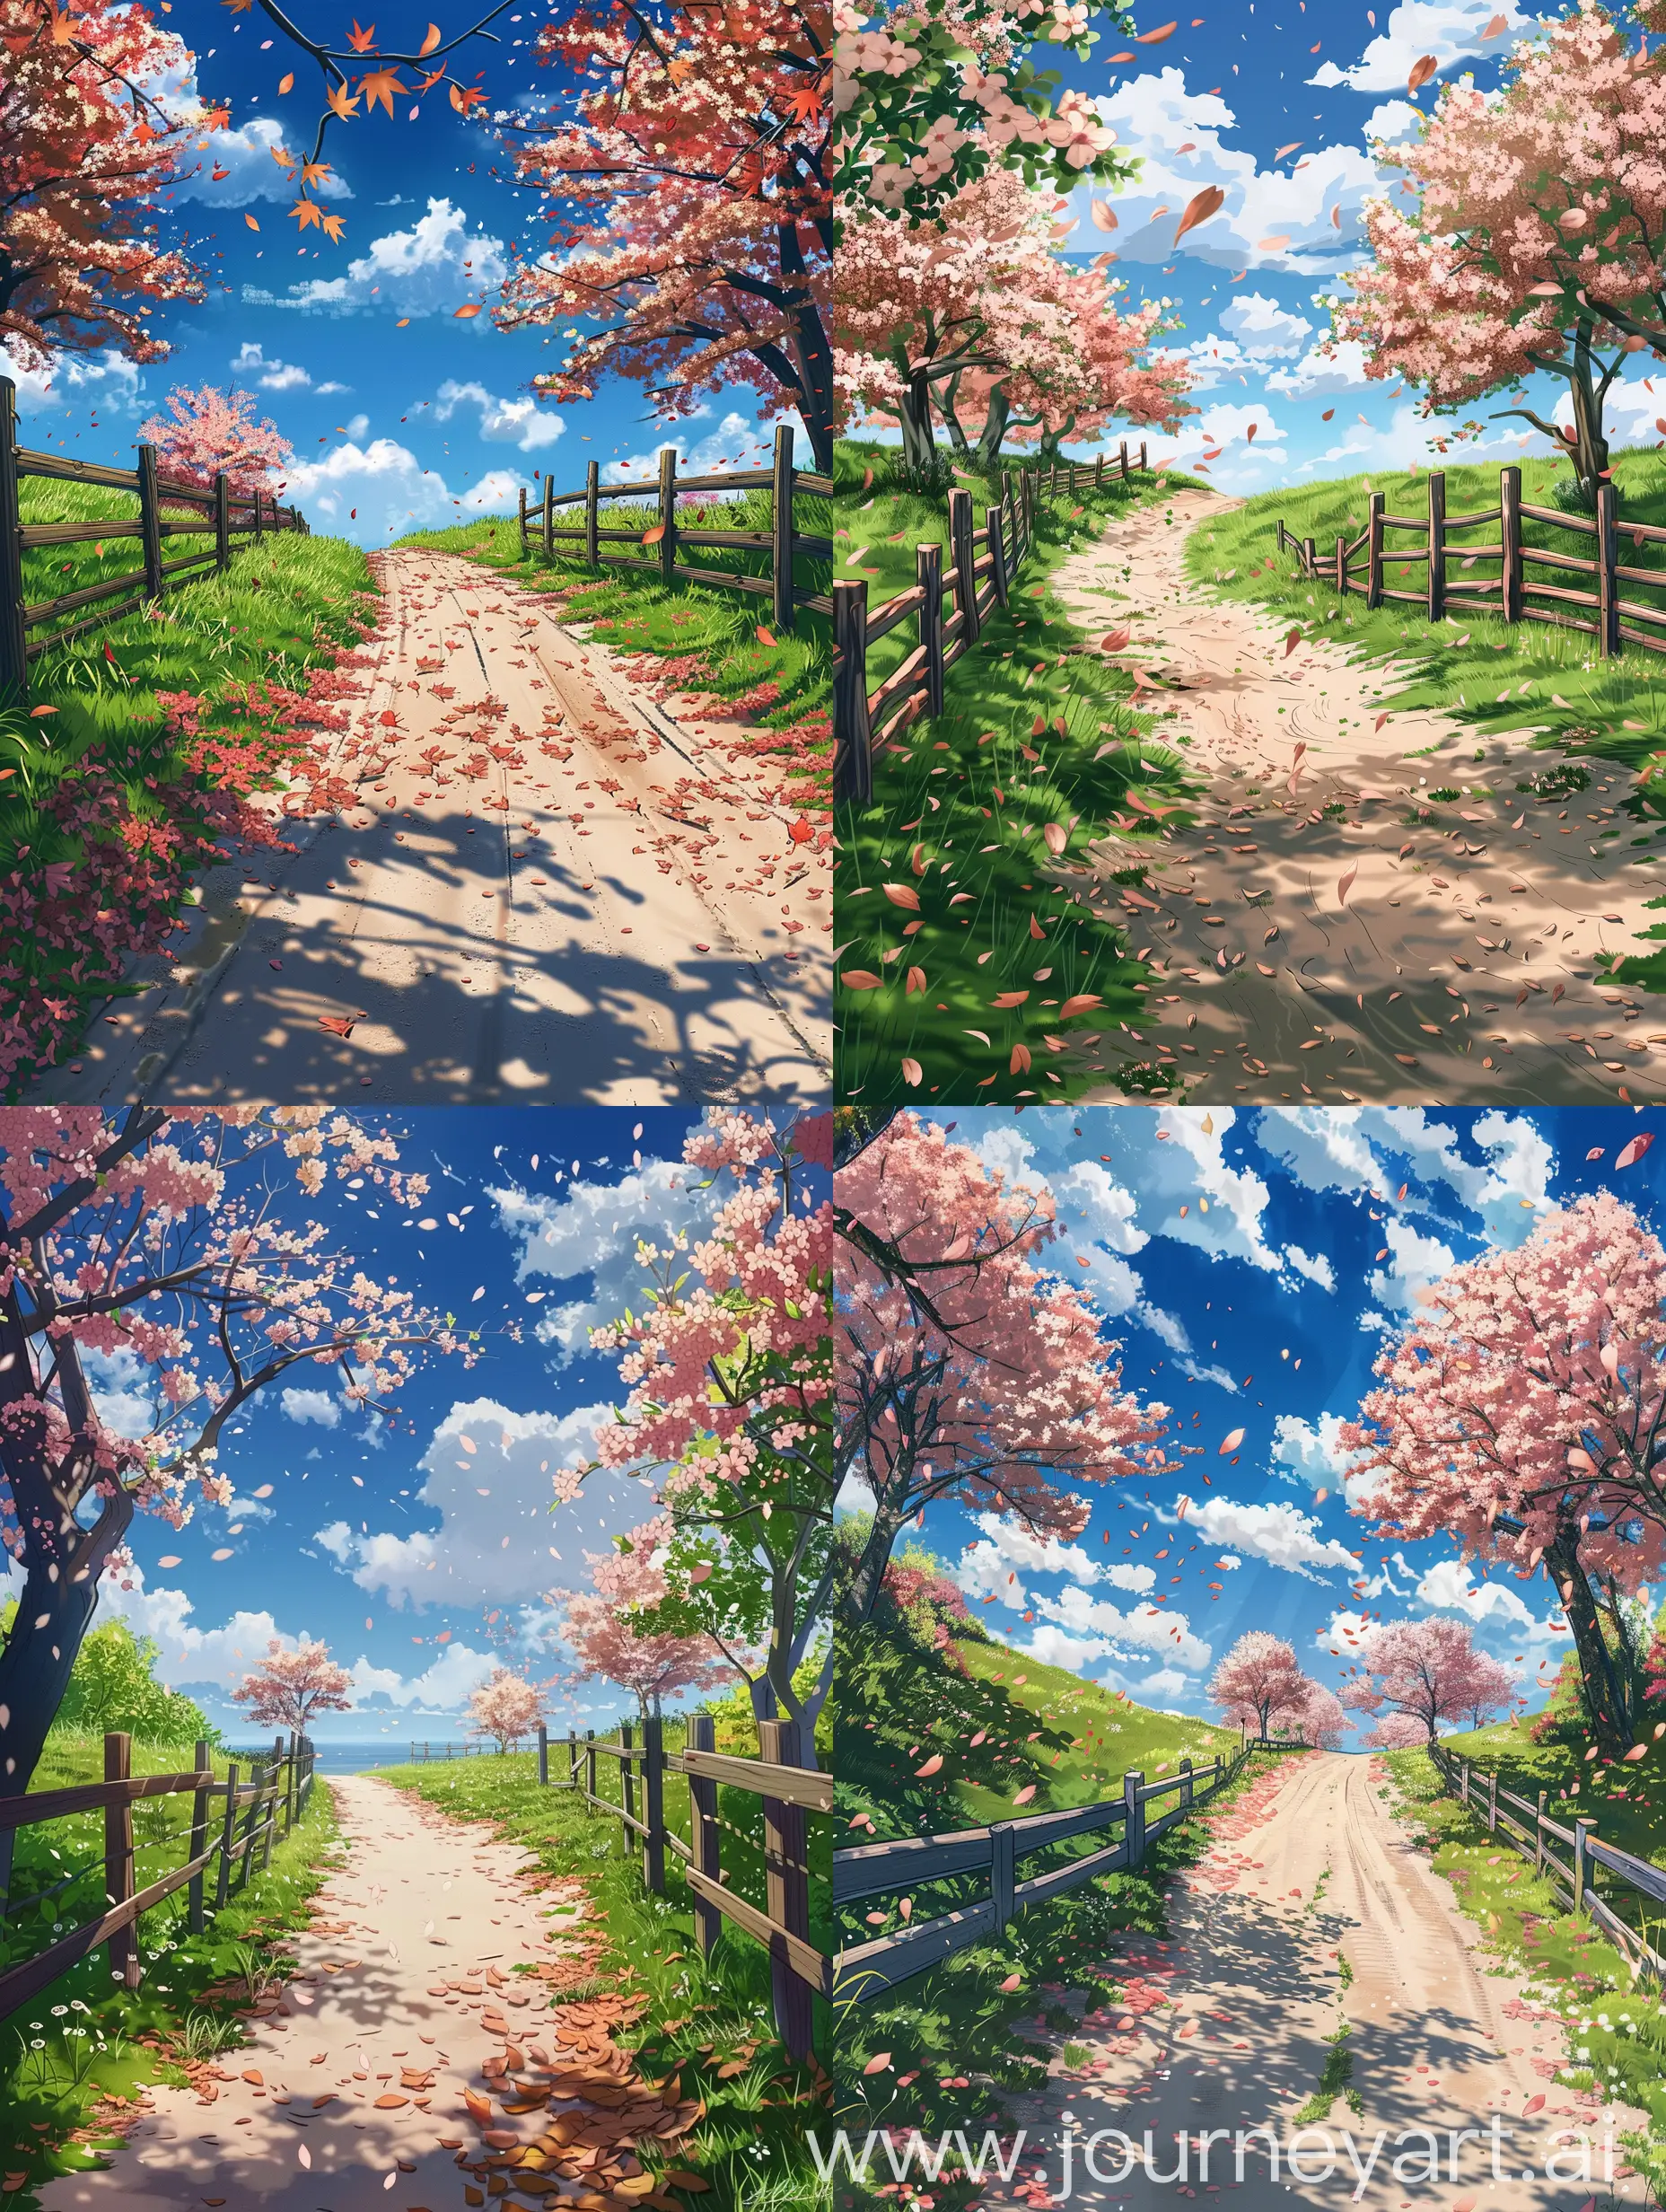 Tranquil-Countryside-Lane-with-Cherry-Blossoms-in-Anime-Style